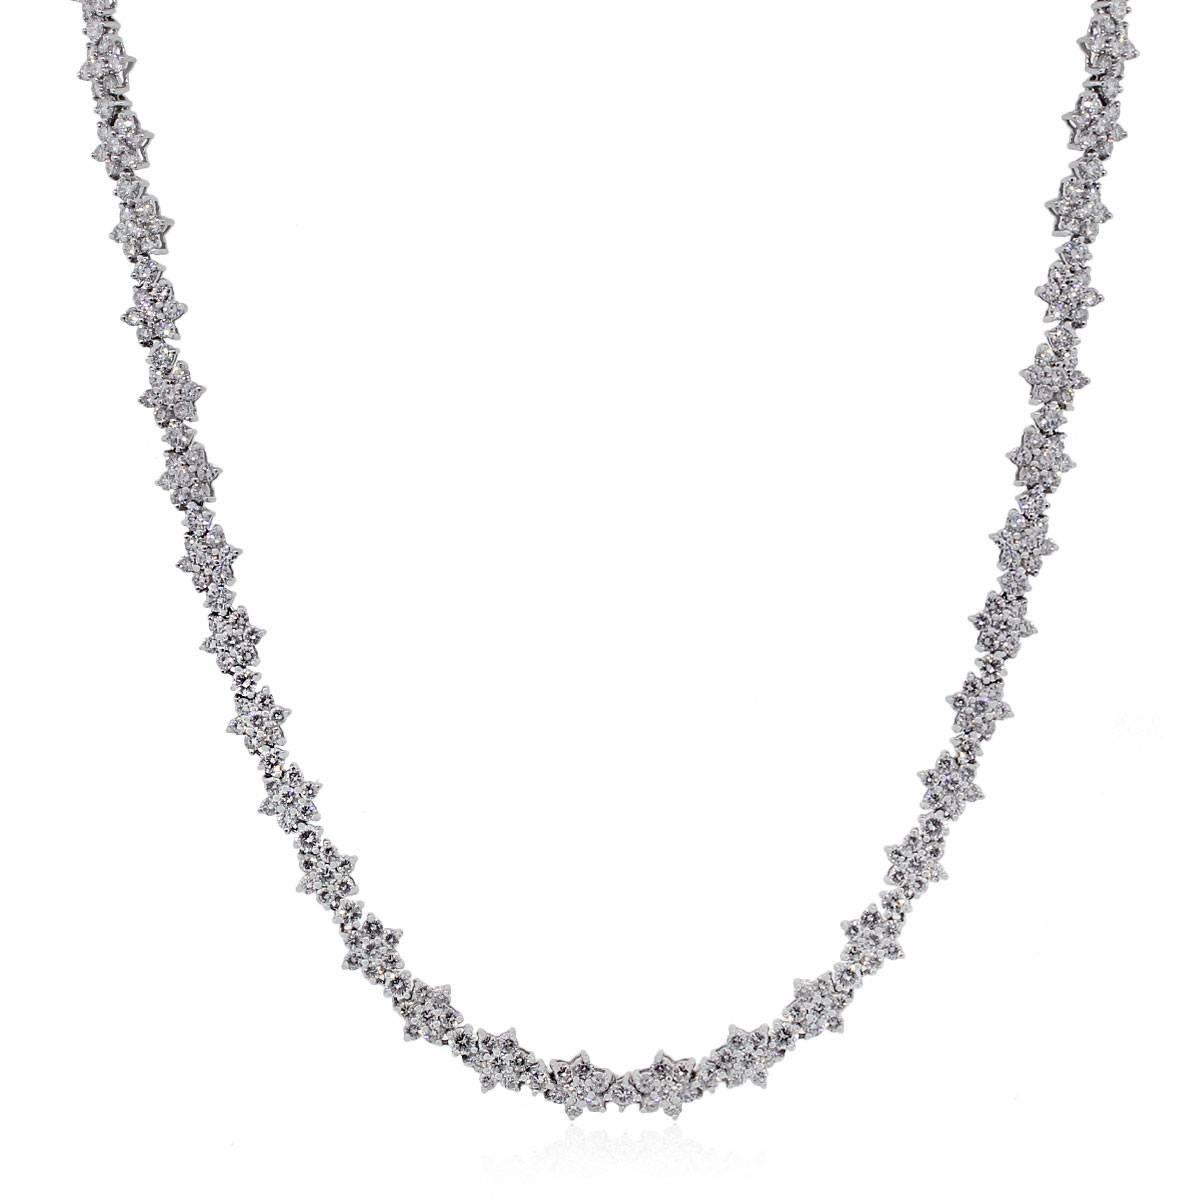 Material: Platinum
Style: Floral diamond necklace
Diamond Details: Approximately 14.90ctw round brilliant diamonds. Diamonds are G/H in color and VS in clarity.
Measurements: Necklace is 17